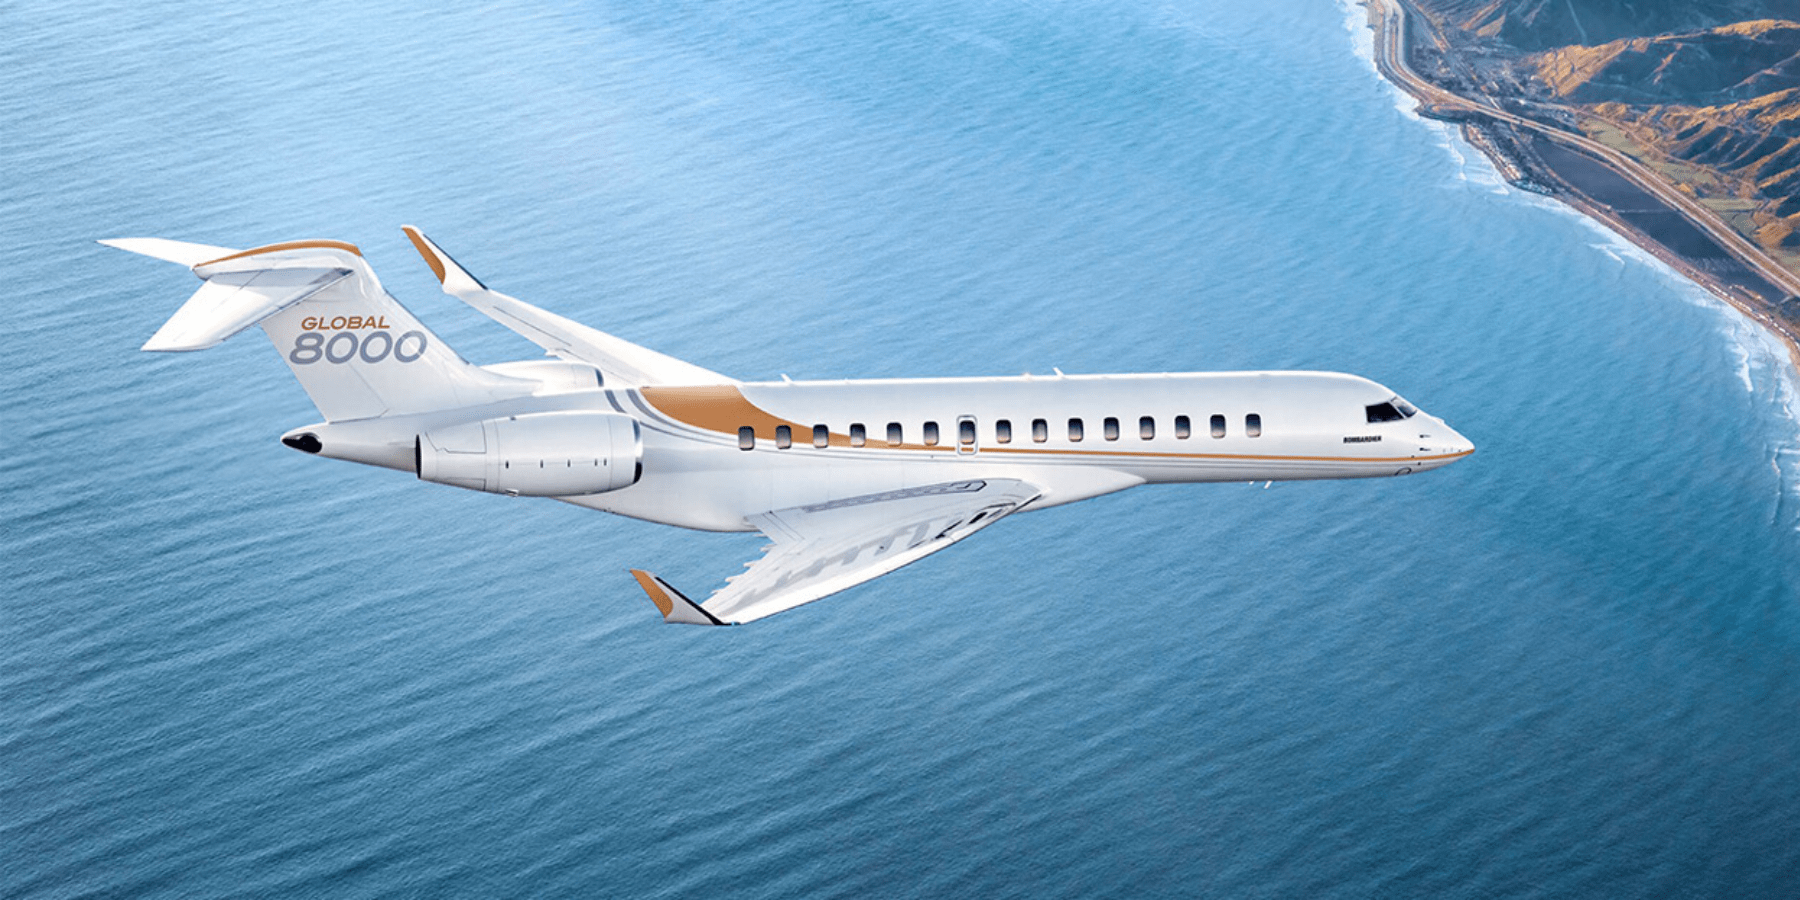 Private Jet and Luxury Lifestyle News Curation for July 2022